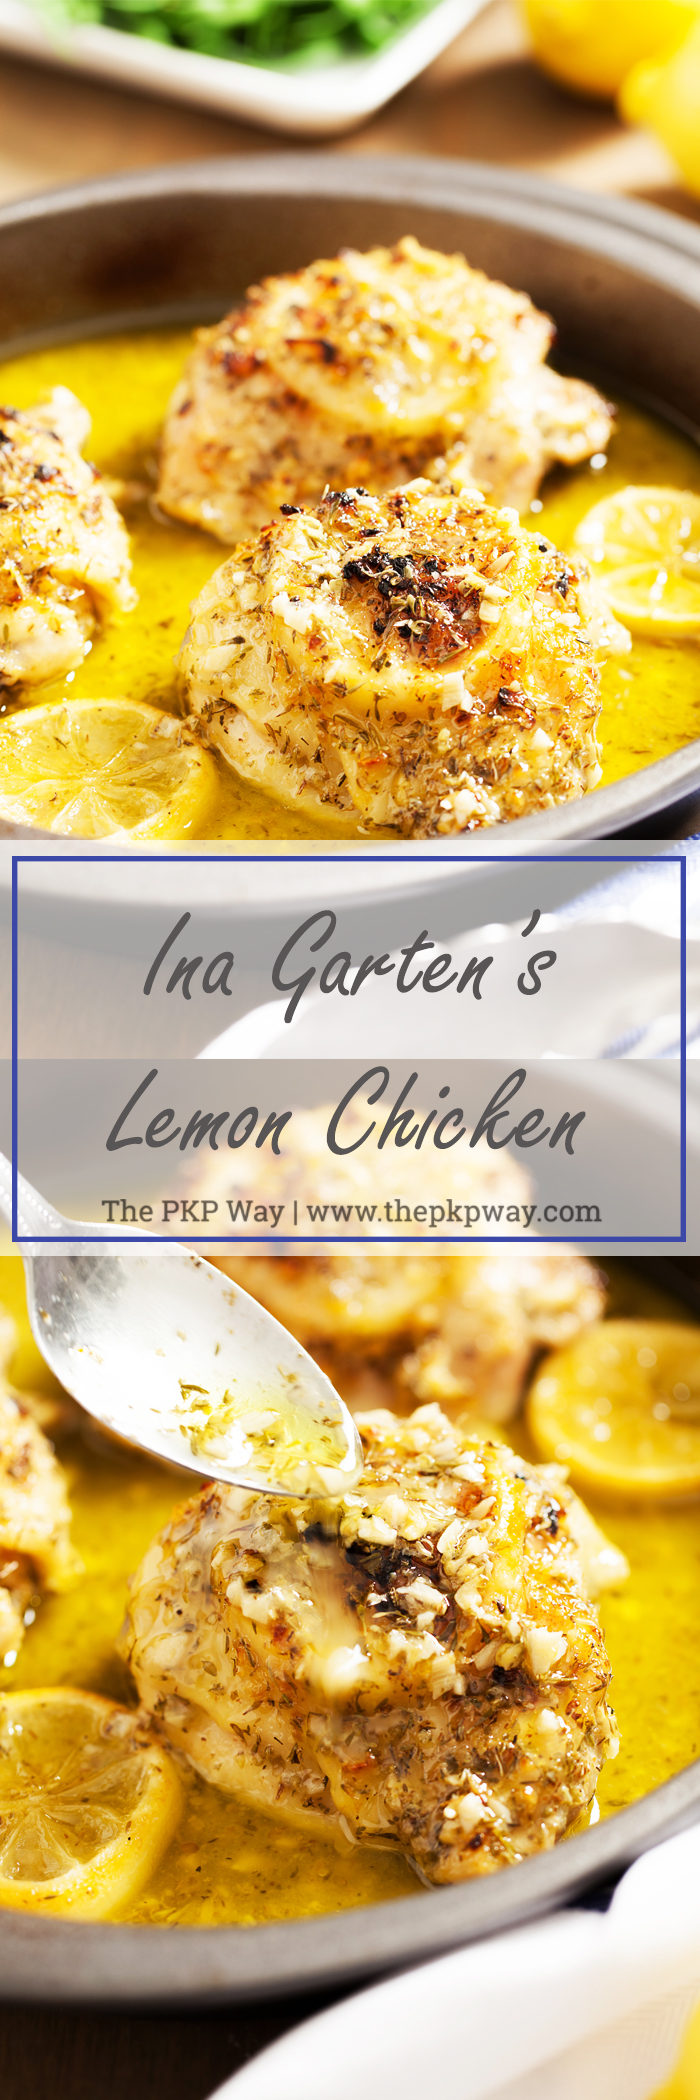 From the Barefoot Contessa herself, Ina Garten's Lemon Chicken is juicy, flavorful, and oh so easy!